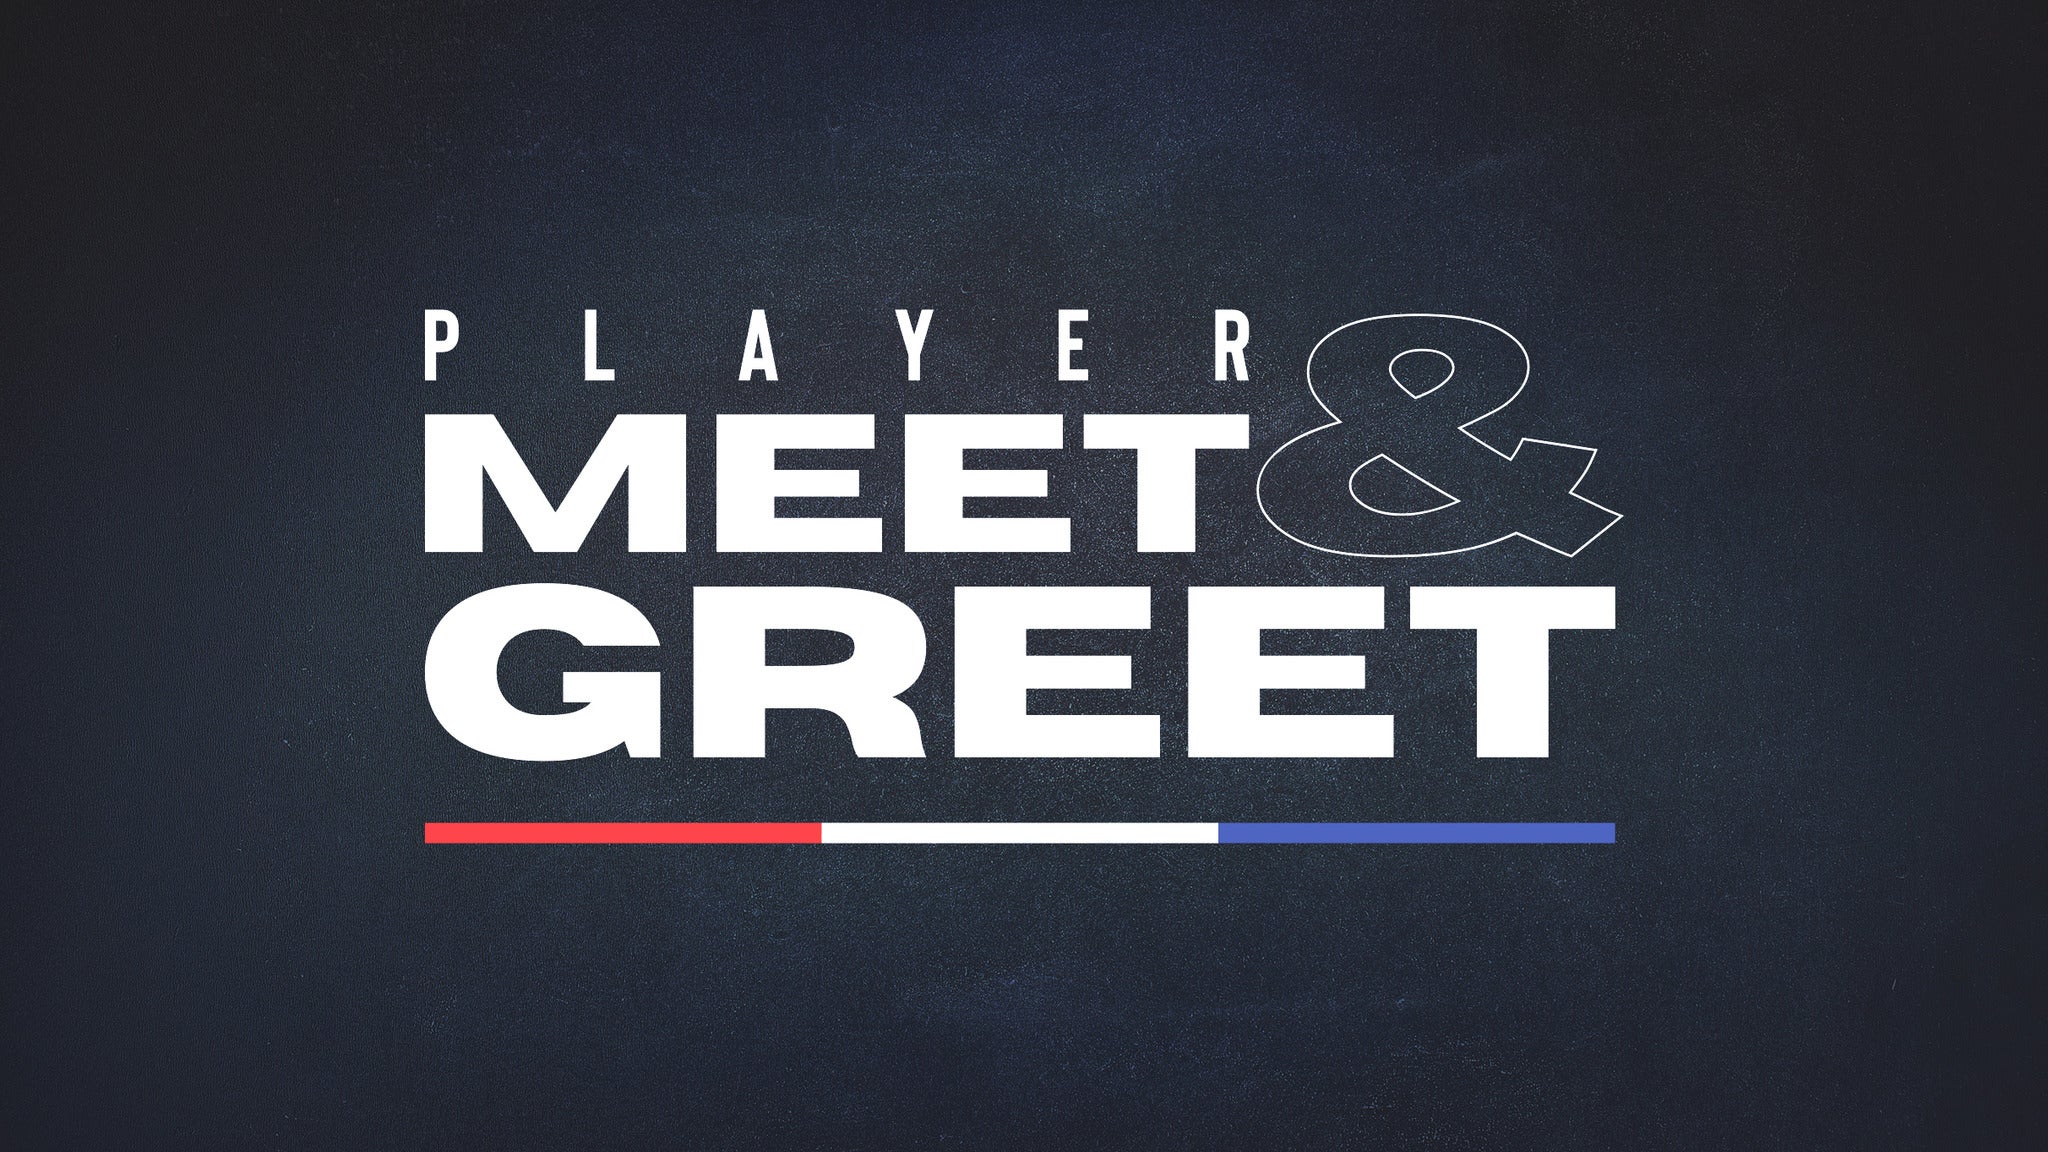 Harlem Globetrotters Player Meet & Greet presale code for early tickets in San Francisco